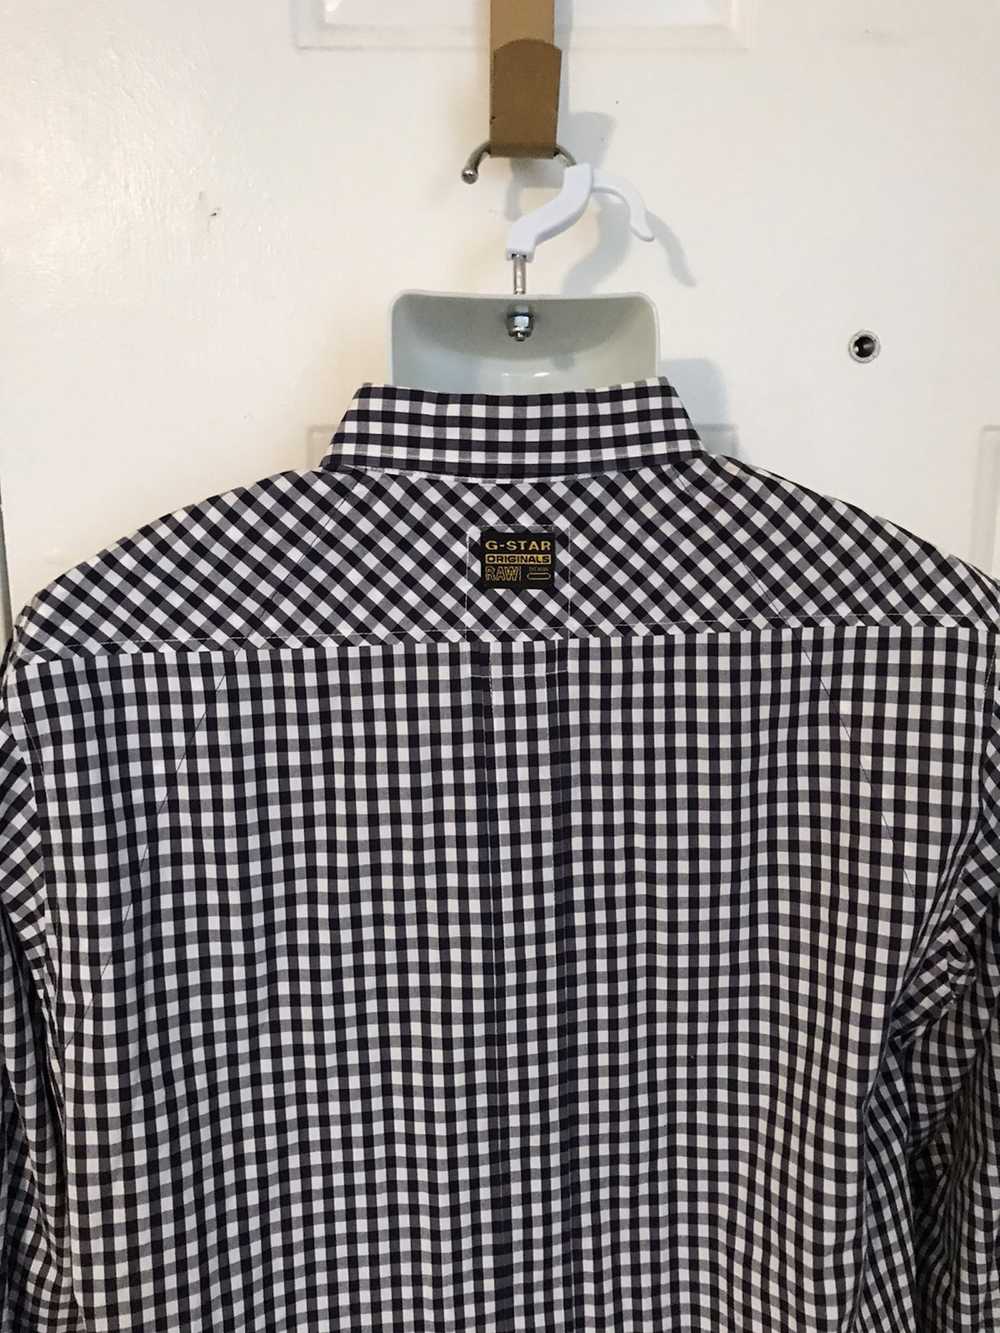 G Star Raw S.O. Squad Gingham Check button down s… - image 5